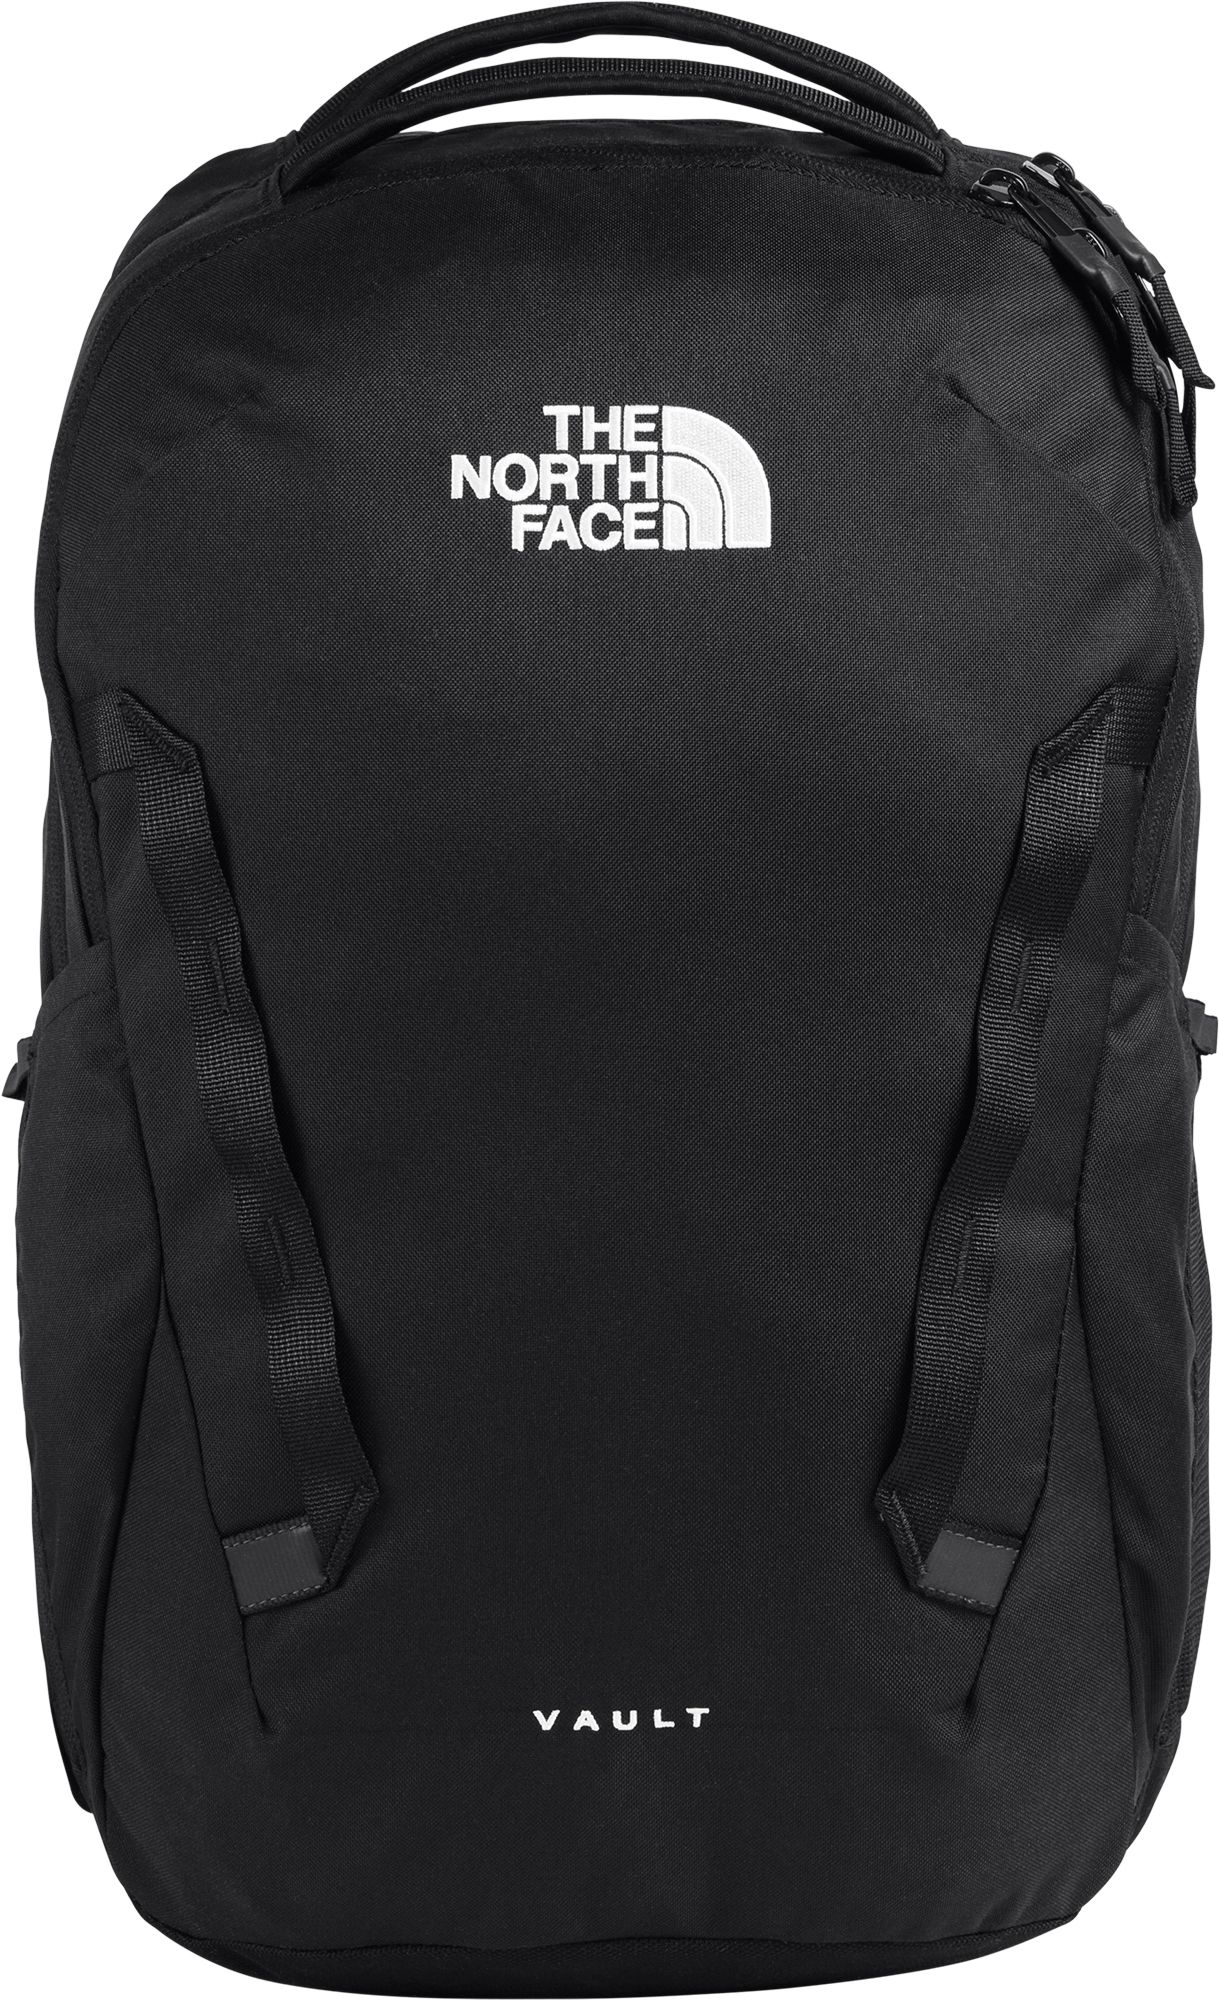 The North Face Men's Vault 20 Backpack 